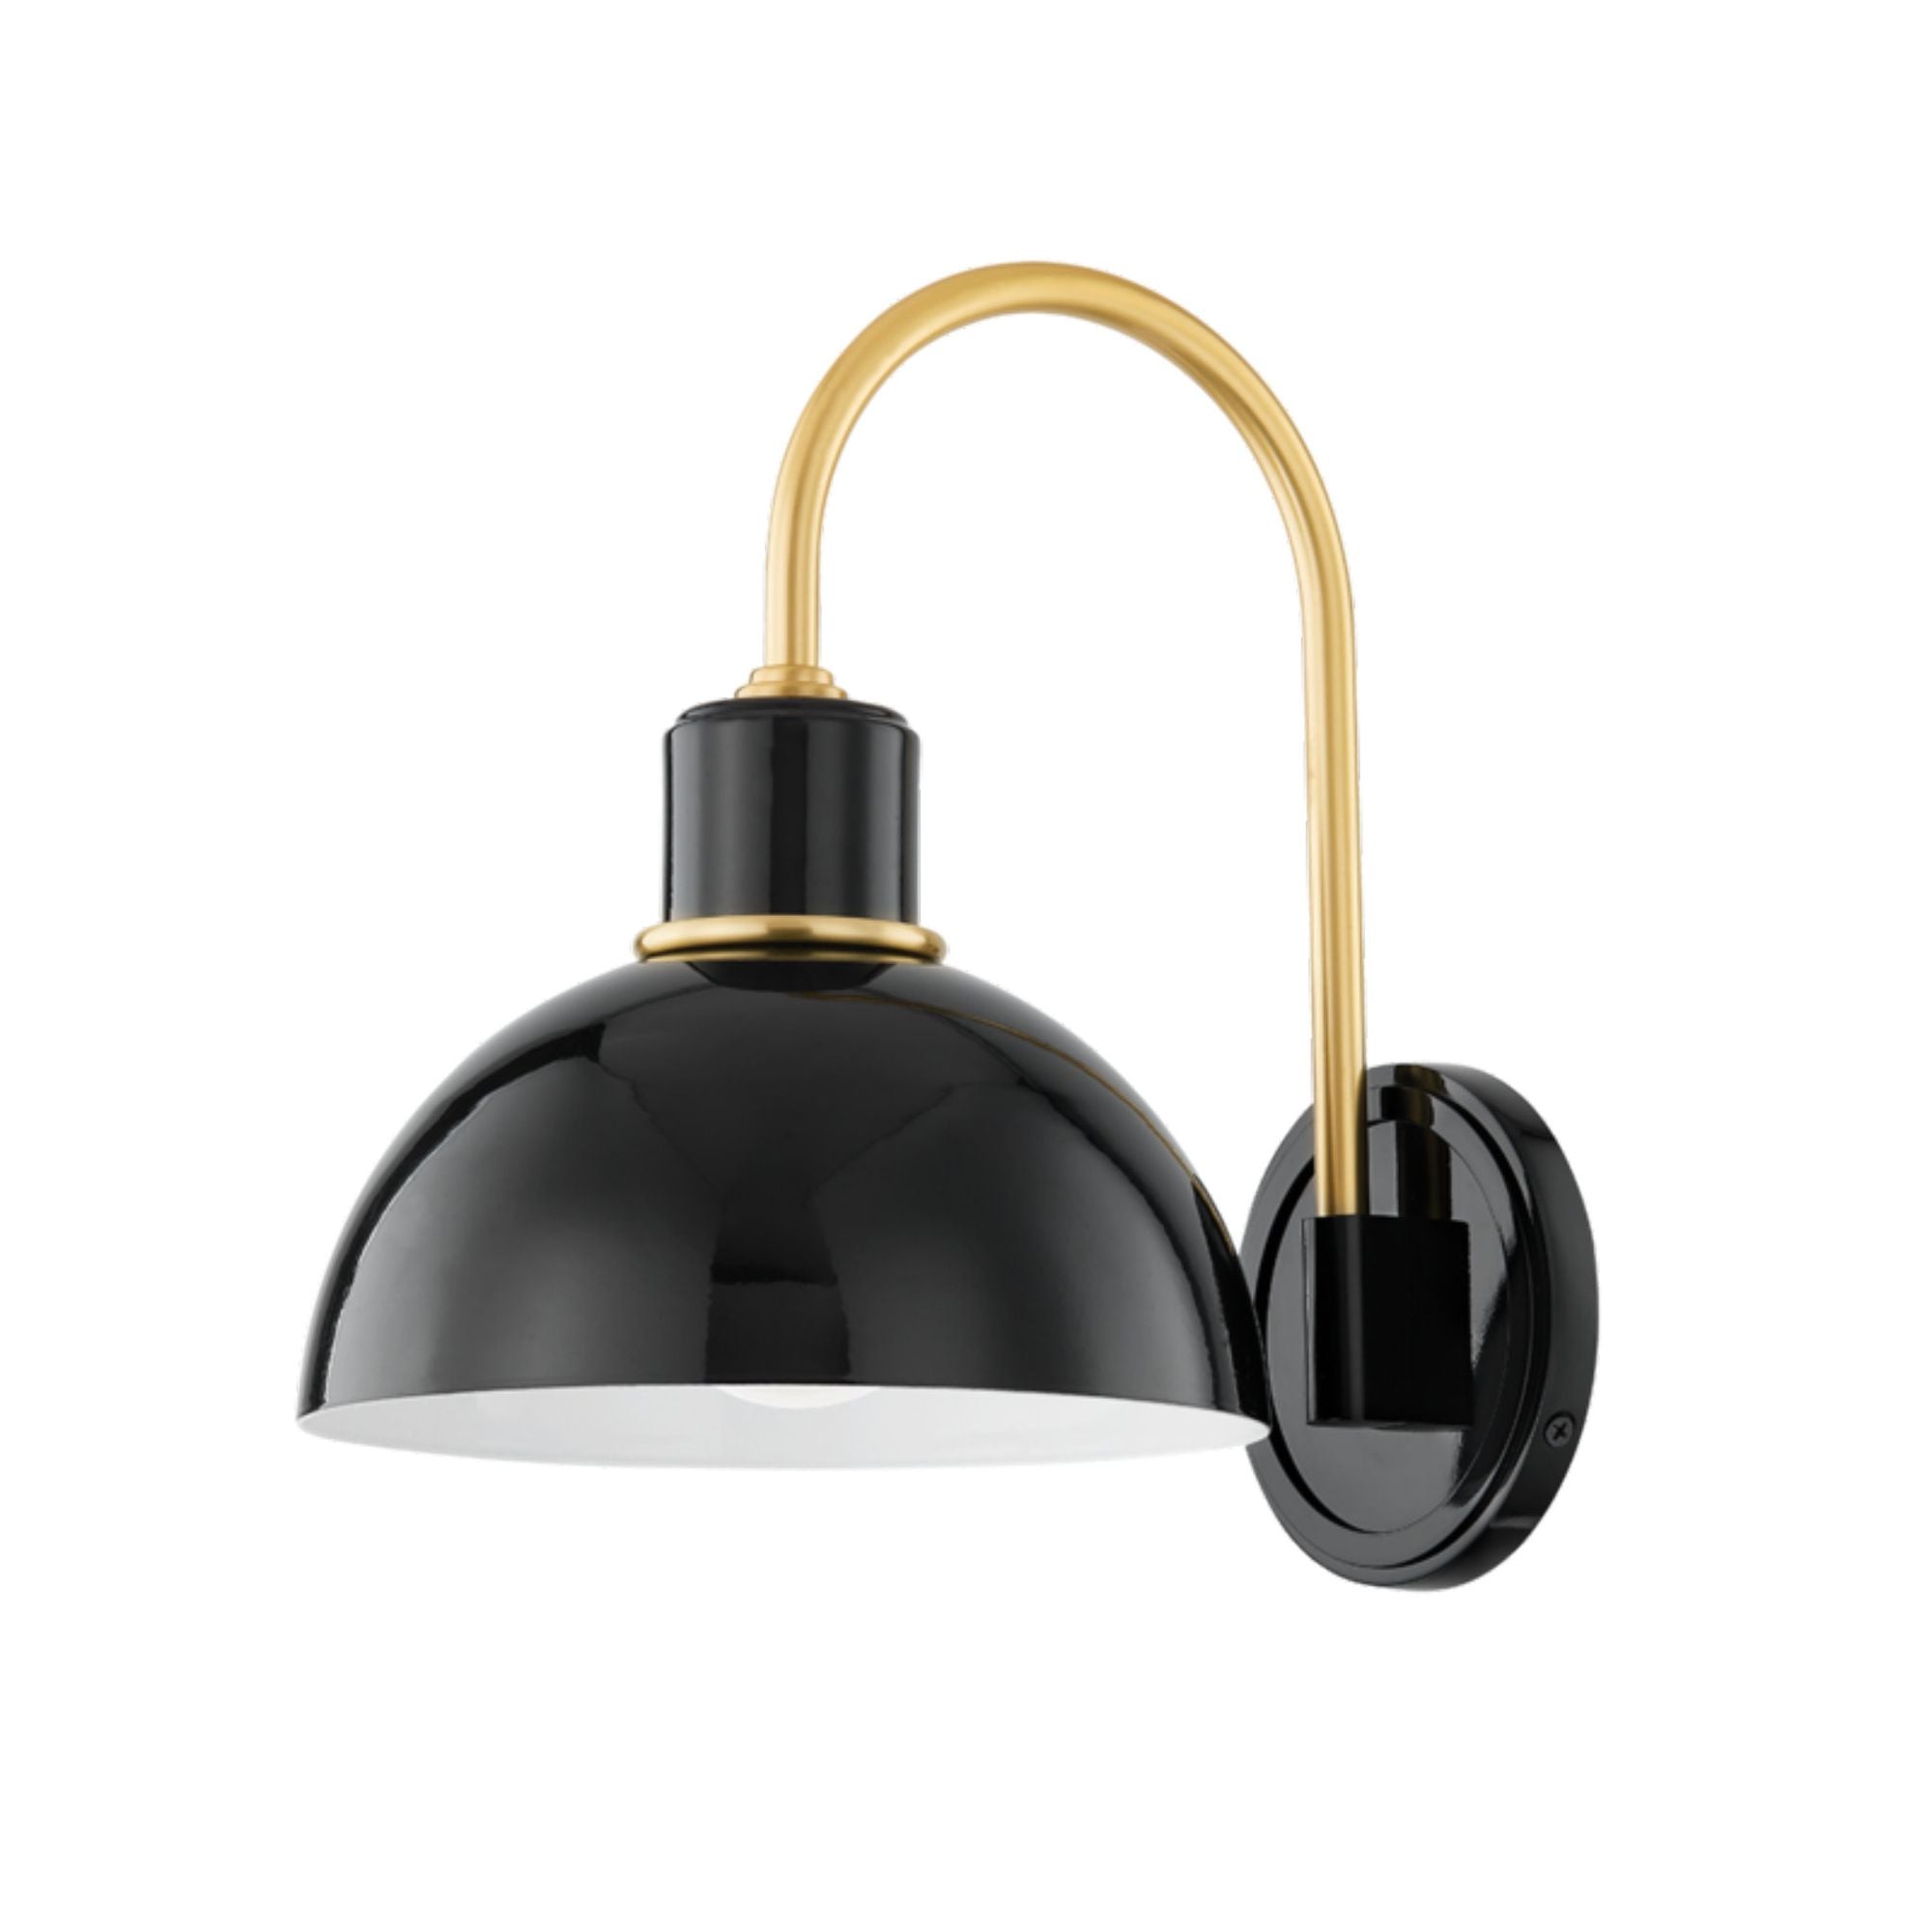 Camille 1-Light Wall Sconce in Aged Brass by Zio & Sons